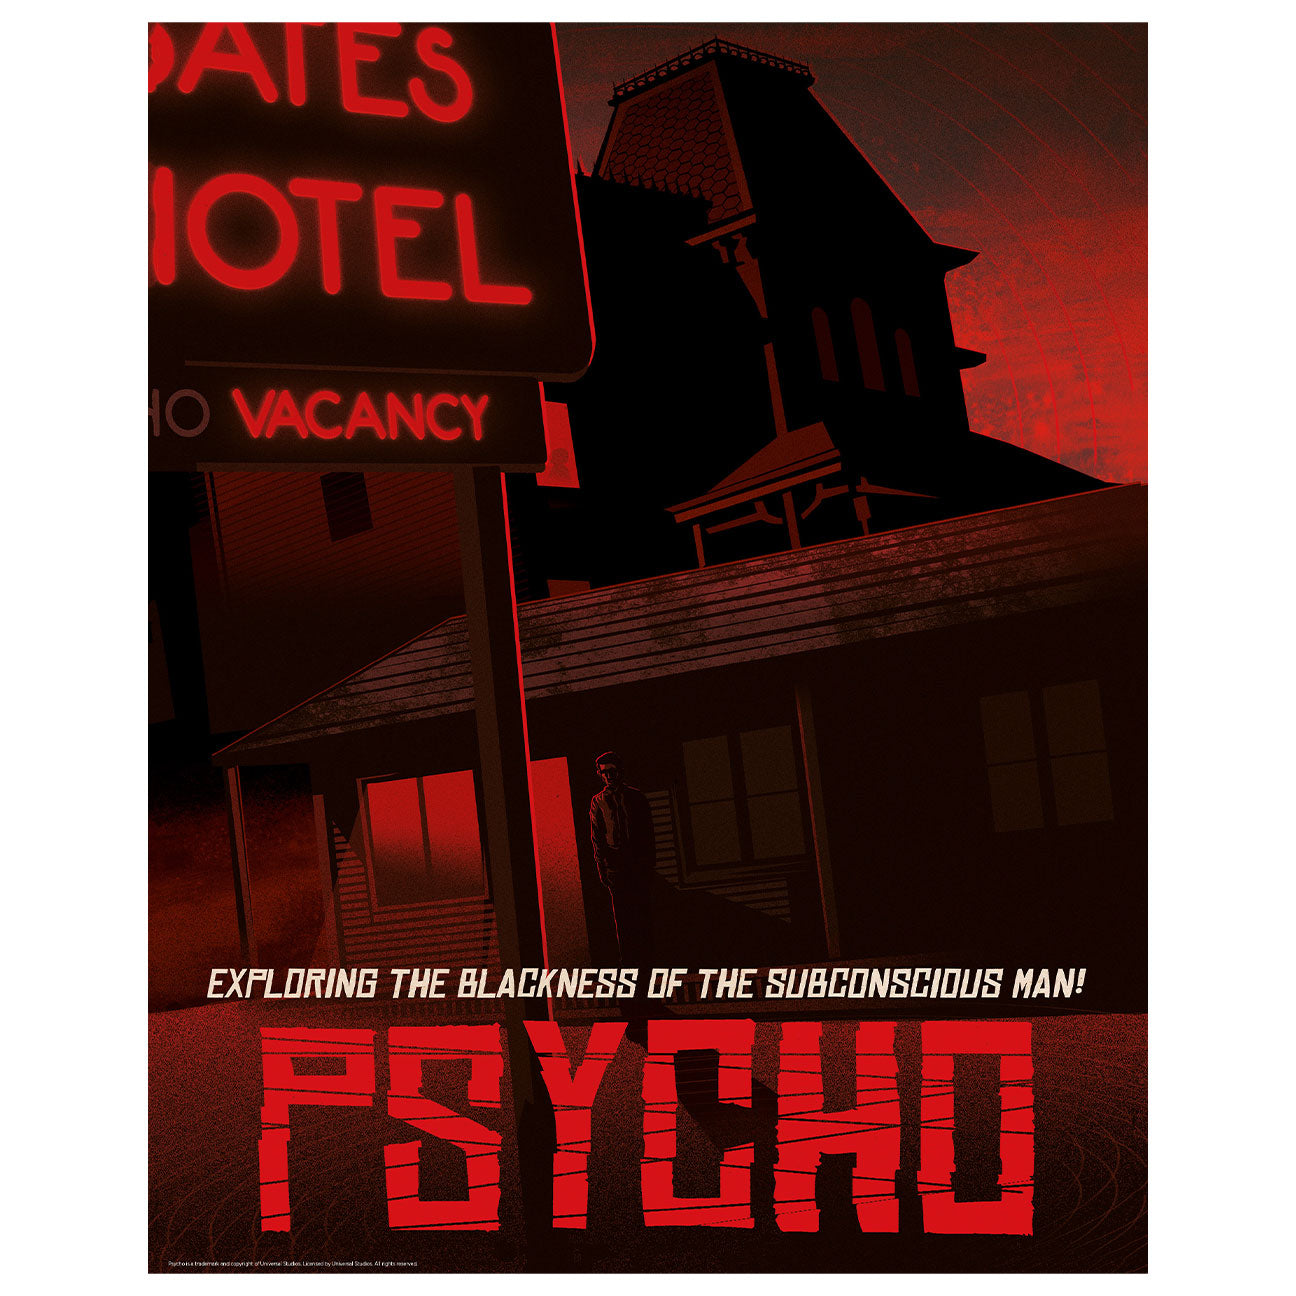 Alfred Hitchcock Psycho Limited Edition Art Print